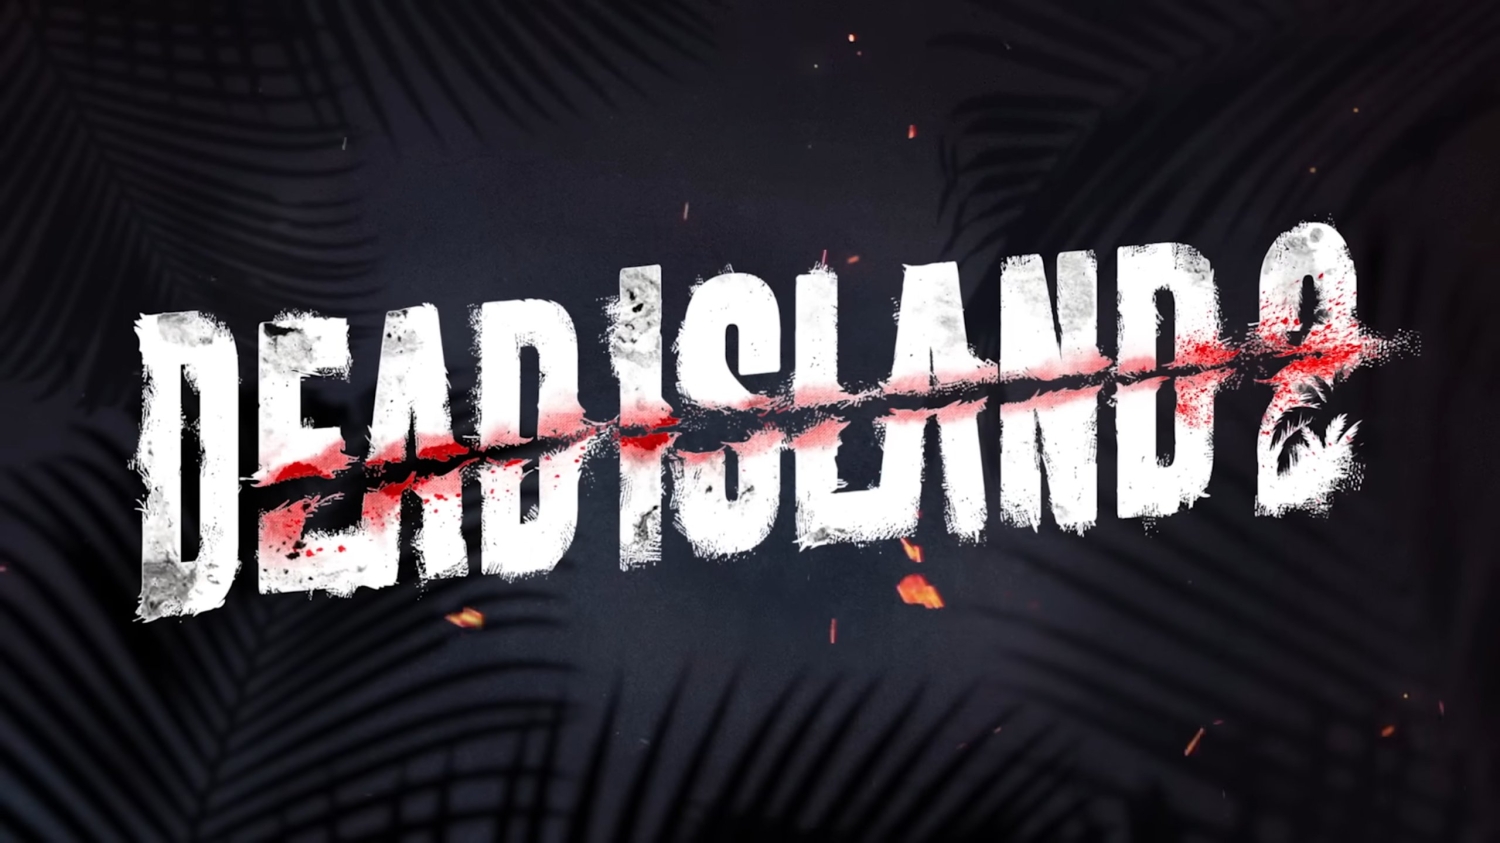 Dead Island 2 - Extended Gameplay Reveal Trailer